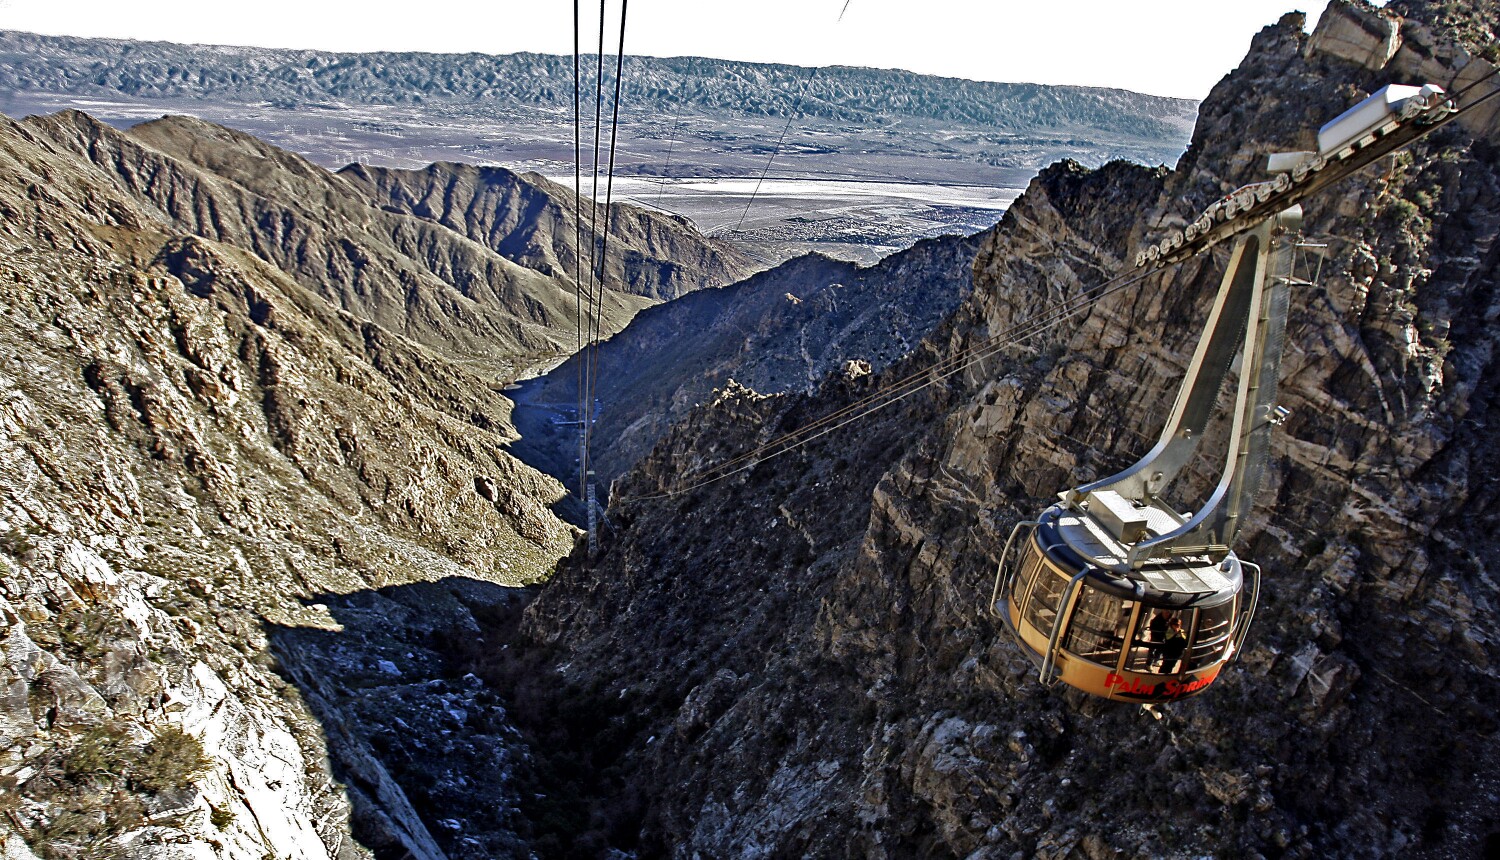 Flash flood closes Palm Springs Aerial Tramway for a week as monsoon slams California deserts